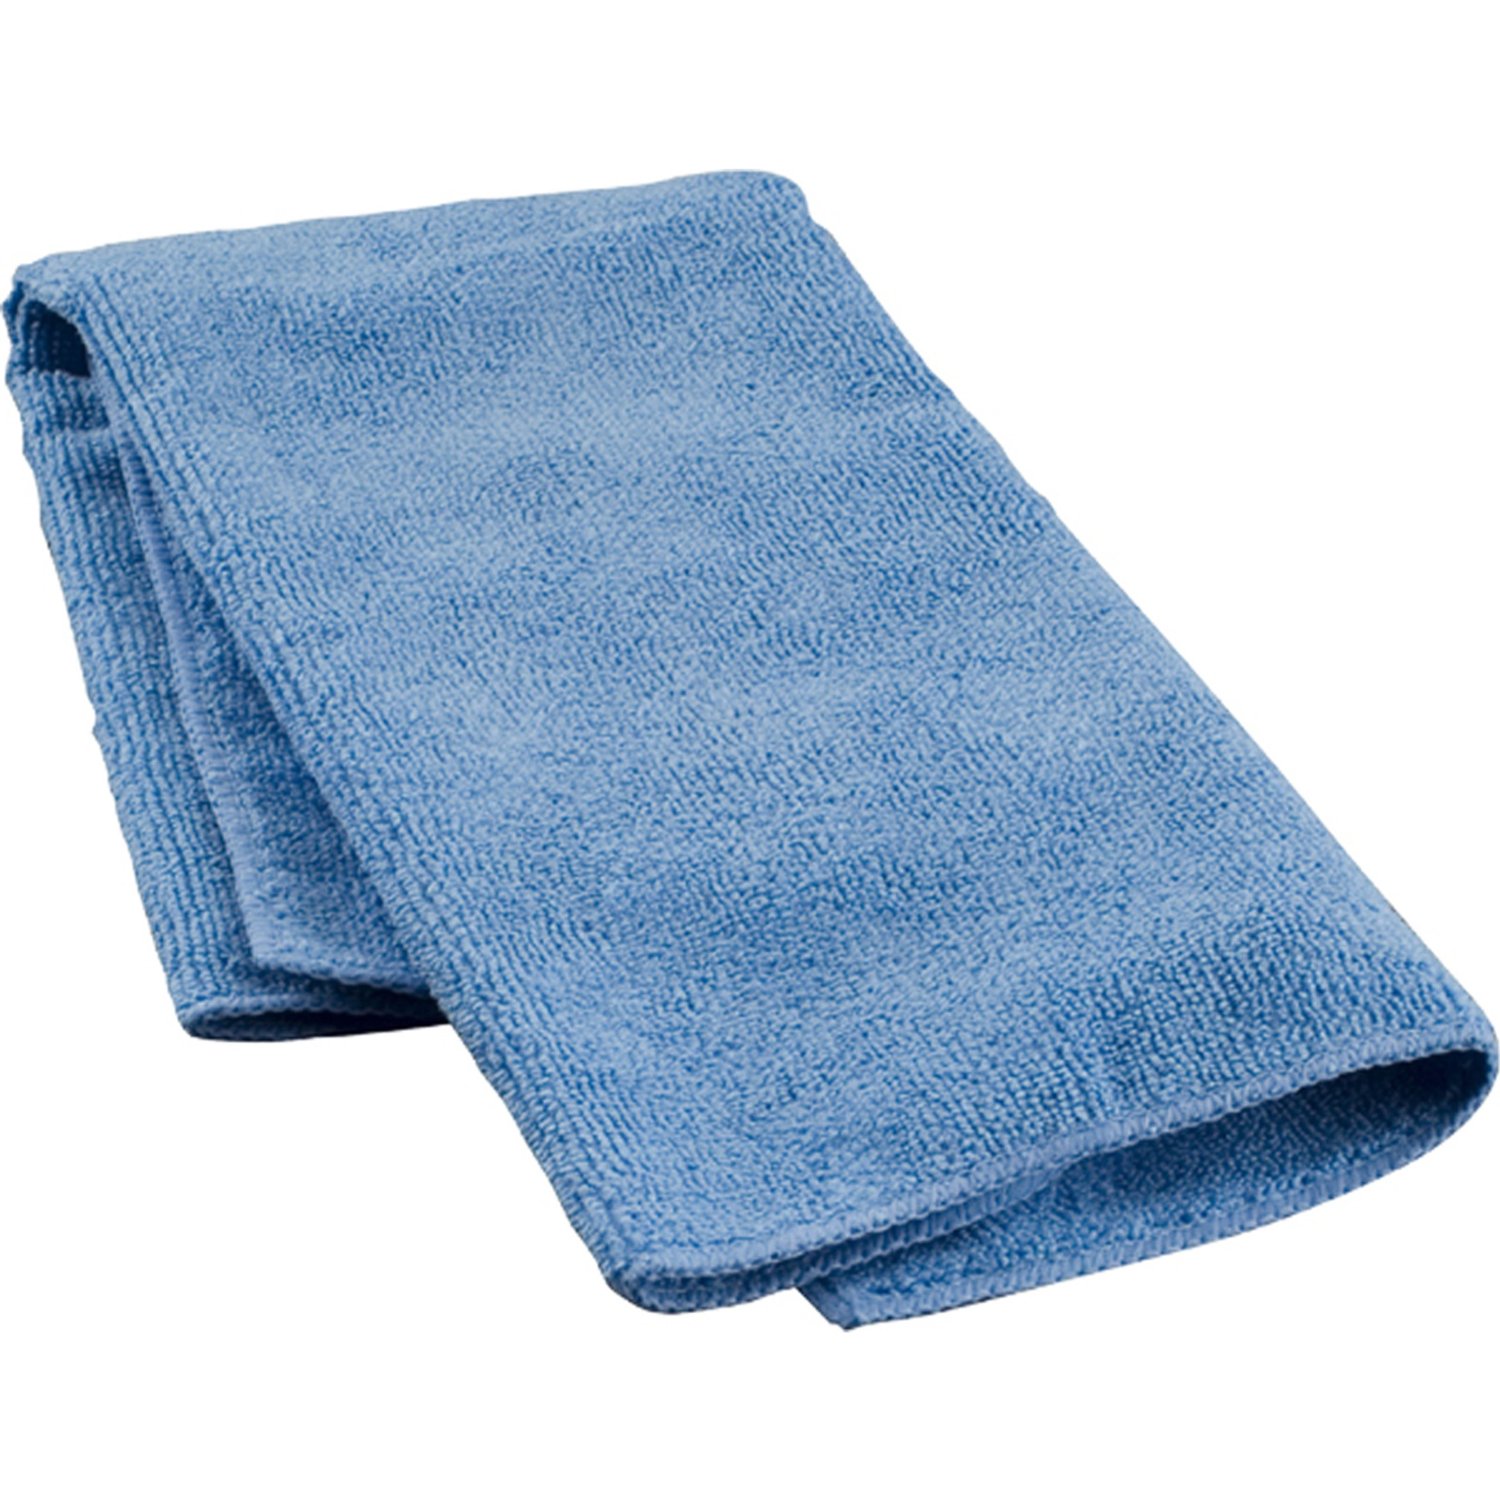 Top Best Microfiber Cleaning Cloths Top Value Reviews